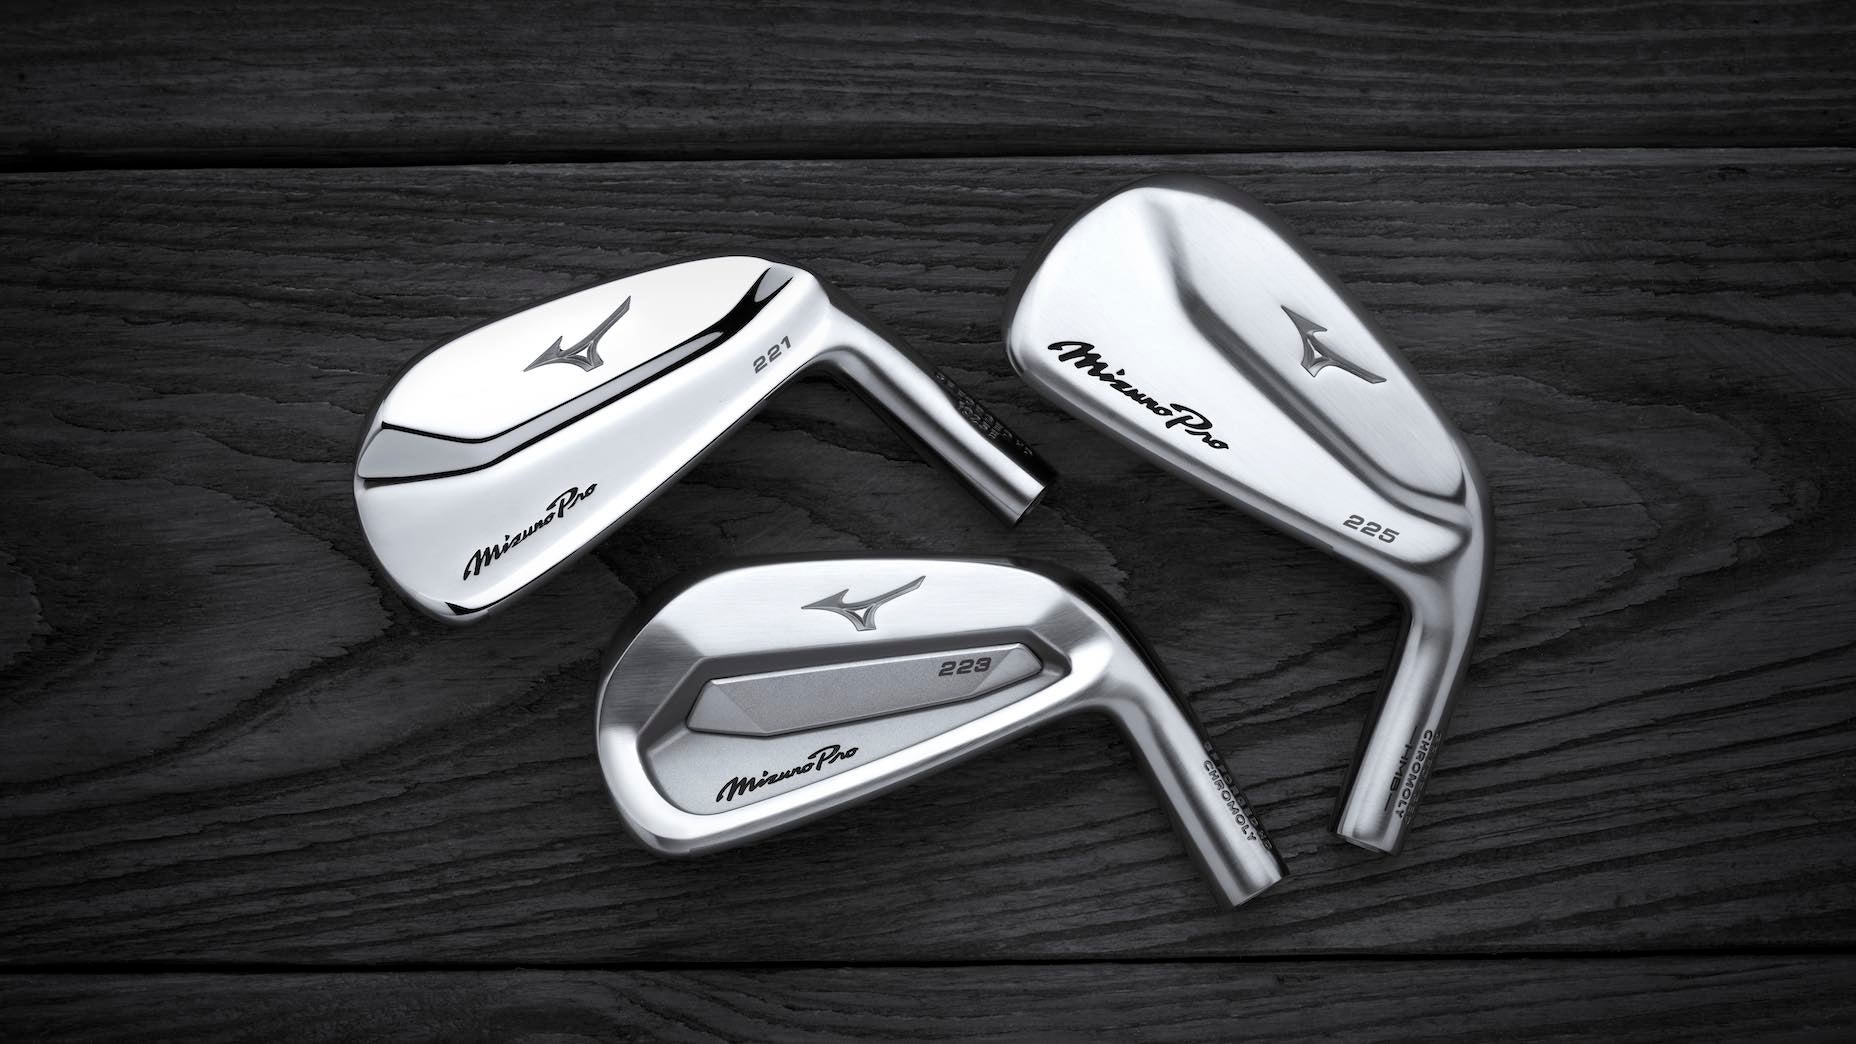 FIRST LOOK: Mizuno Pro 221, 223, and 225 irons debut in North America